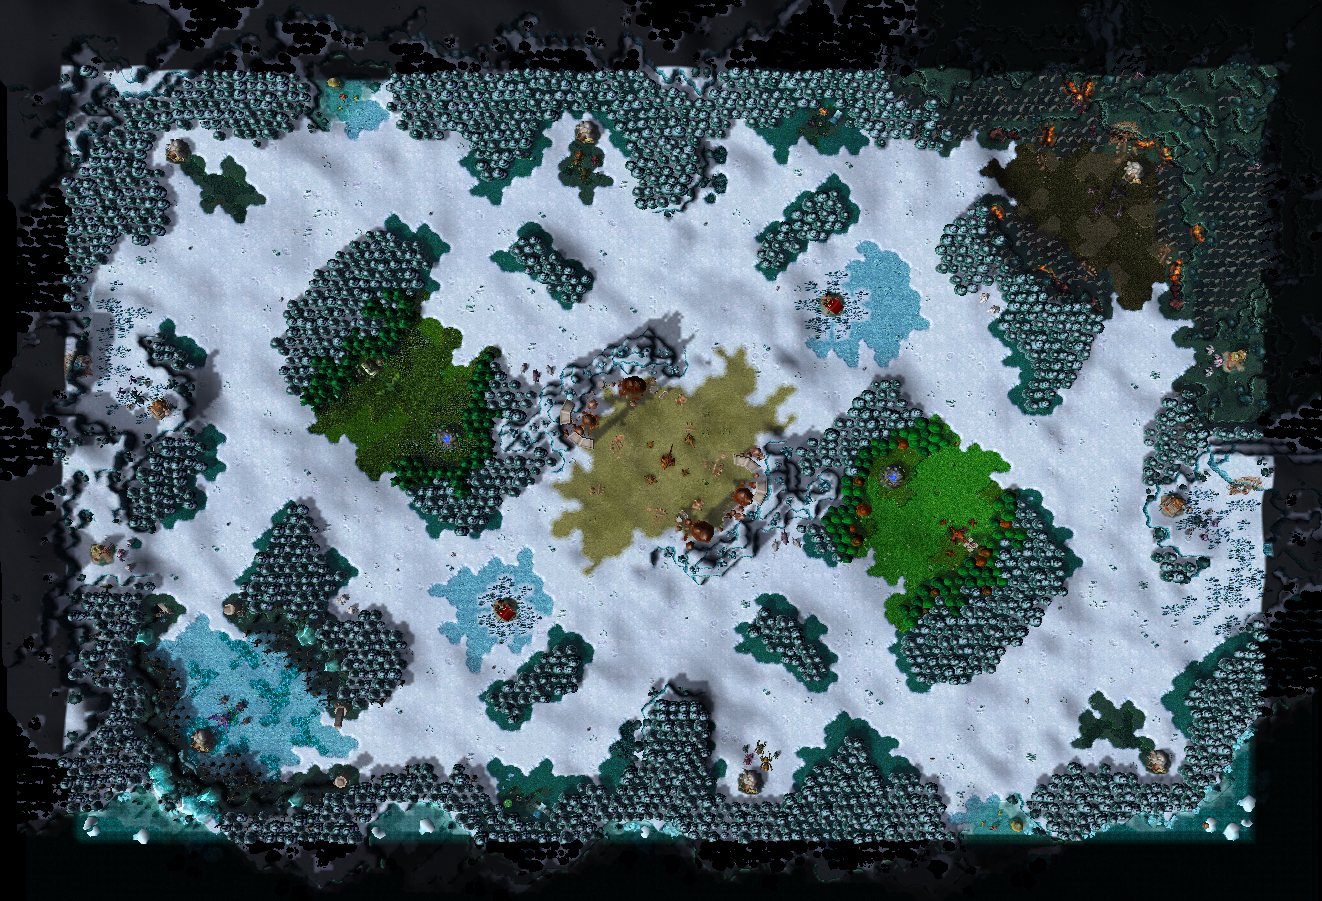 dragonblight-map-above.png